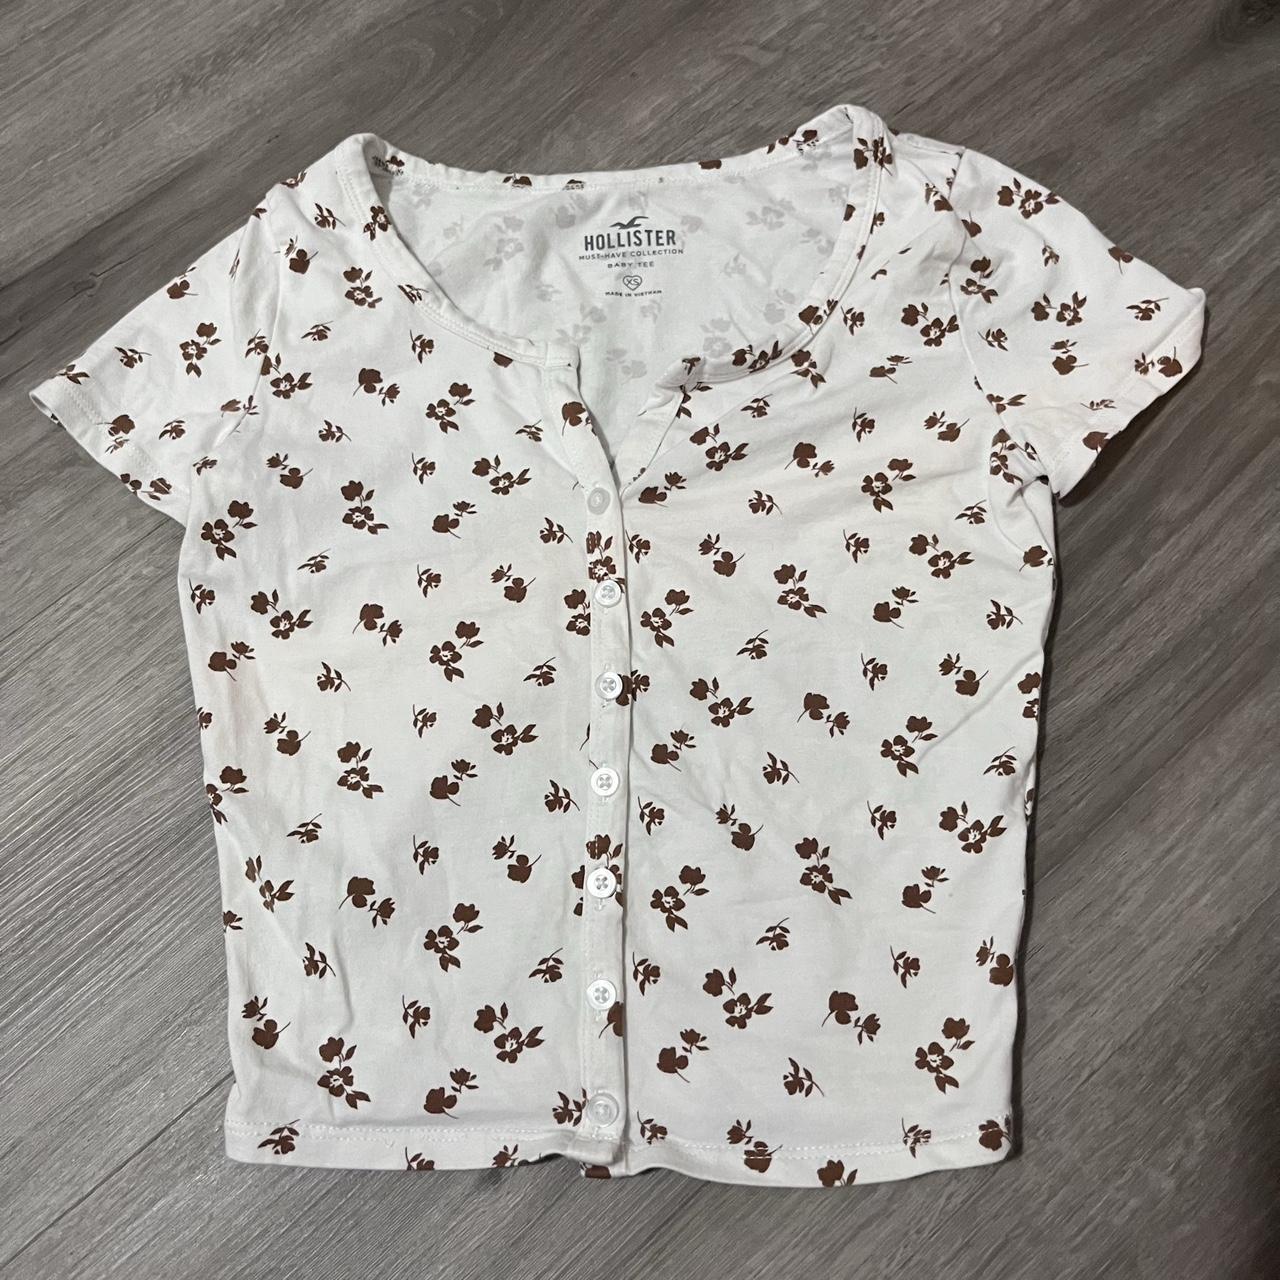 Hollister Floral Baby Tee, Size XS - Depop